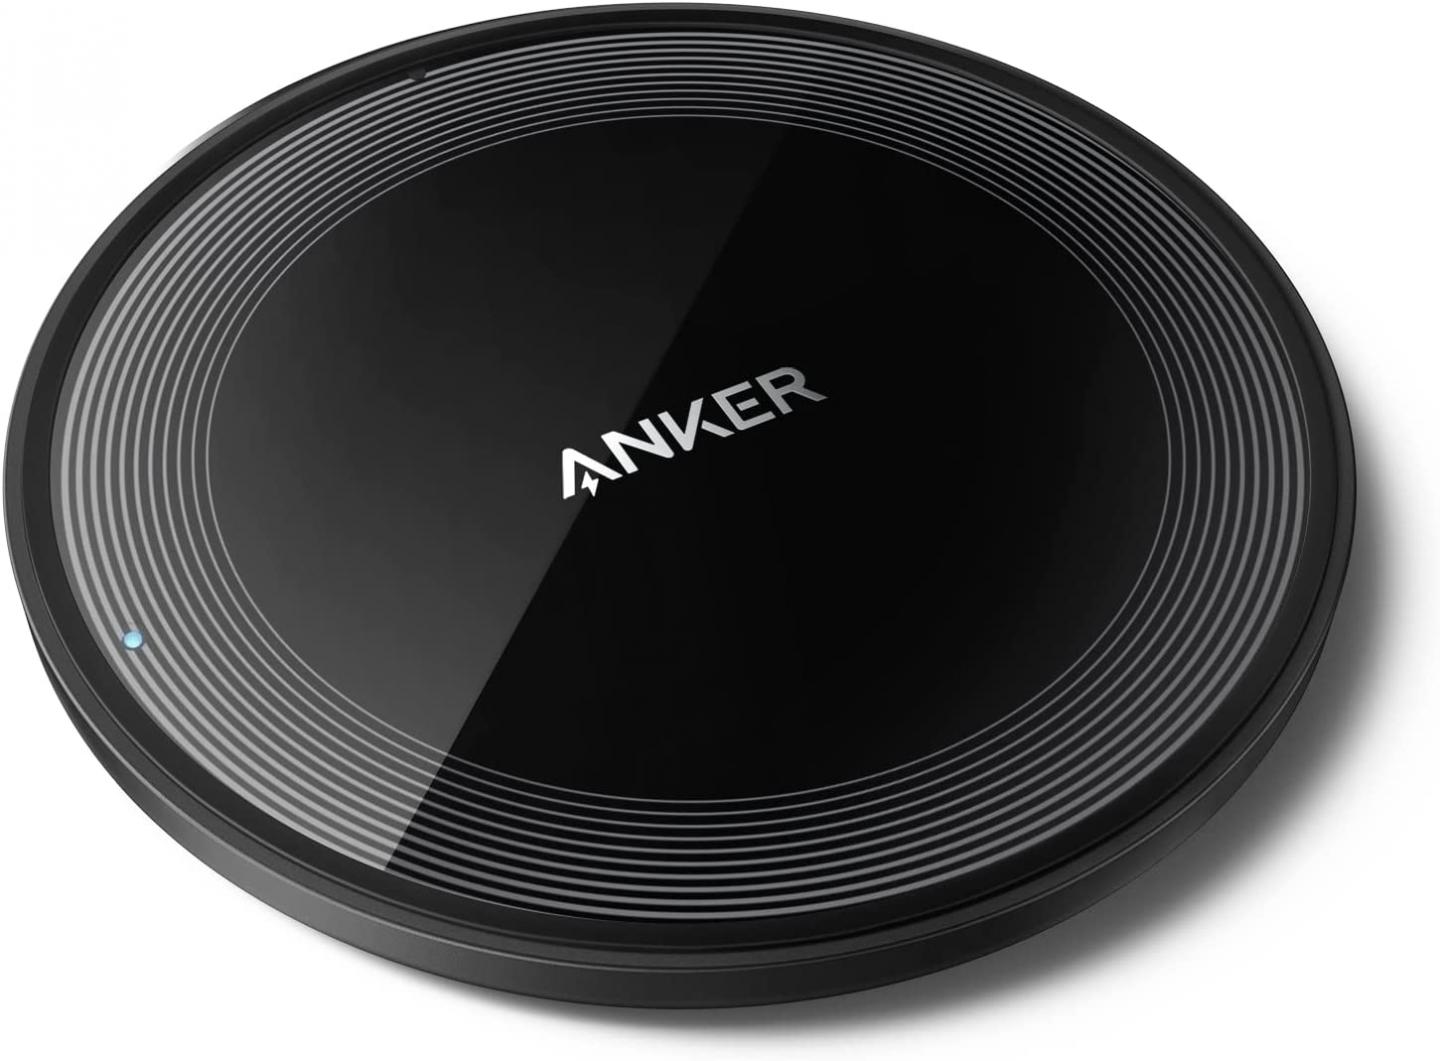 Anker Wireless Charger, 315 Wireless Charger (Pad), 10W Max Fast Charging, Compatible with iPhone 13/12 Series, Samsung S22, AirPods, Samsung Buds, Google Buds, and More (Wall Charger Not Included)